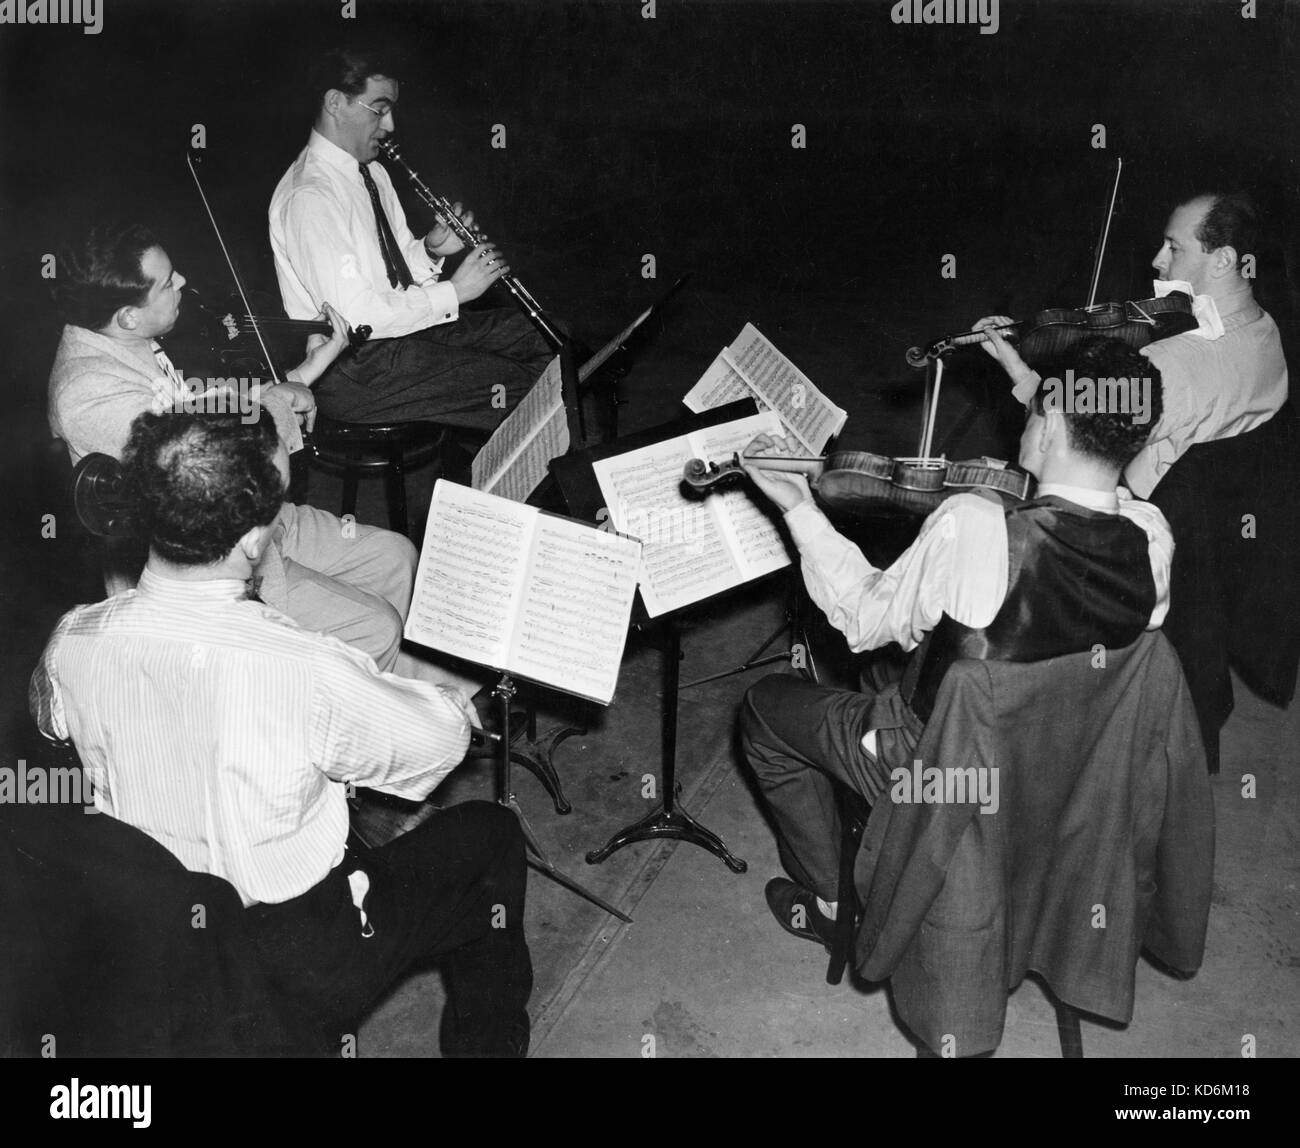 Benny Goodman and the Budapest Quartet. Musicians playing instruments including clarinet, violins and cello.  Score, notation. Stock Photo